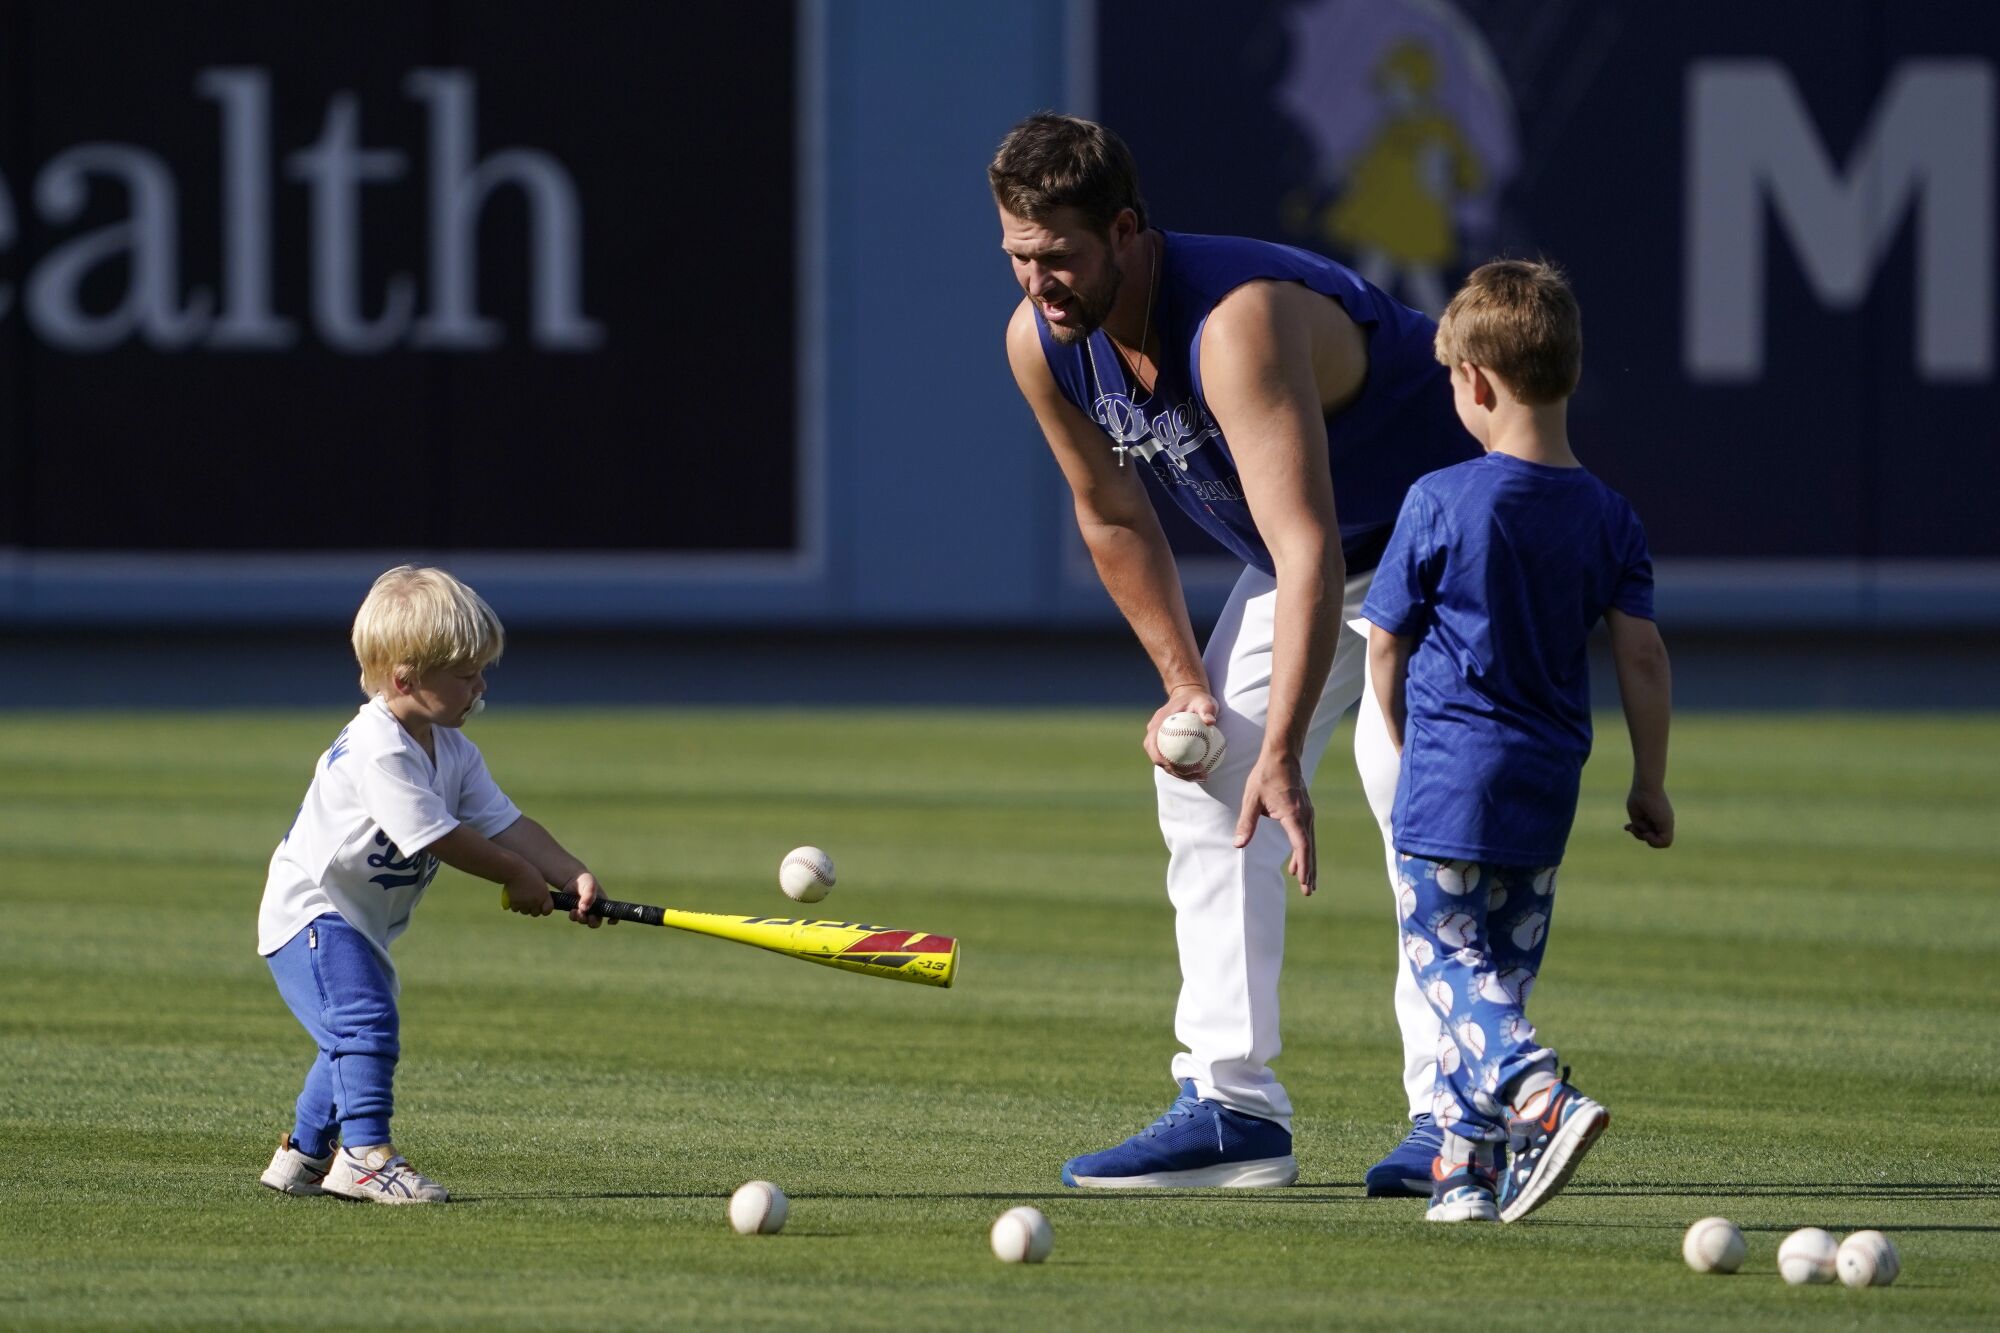 Los Angeles Dodgers pitcher Clayton Kershaw pitches to his son Cooper, left, as his other son Charley watches